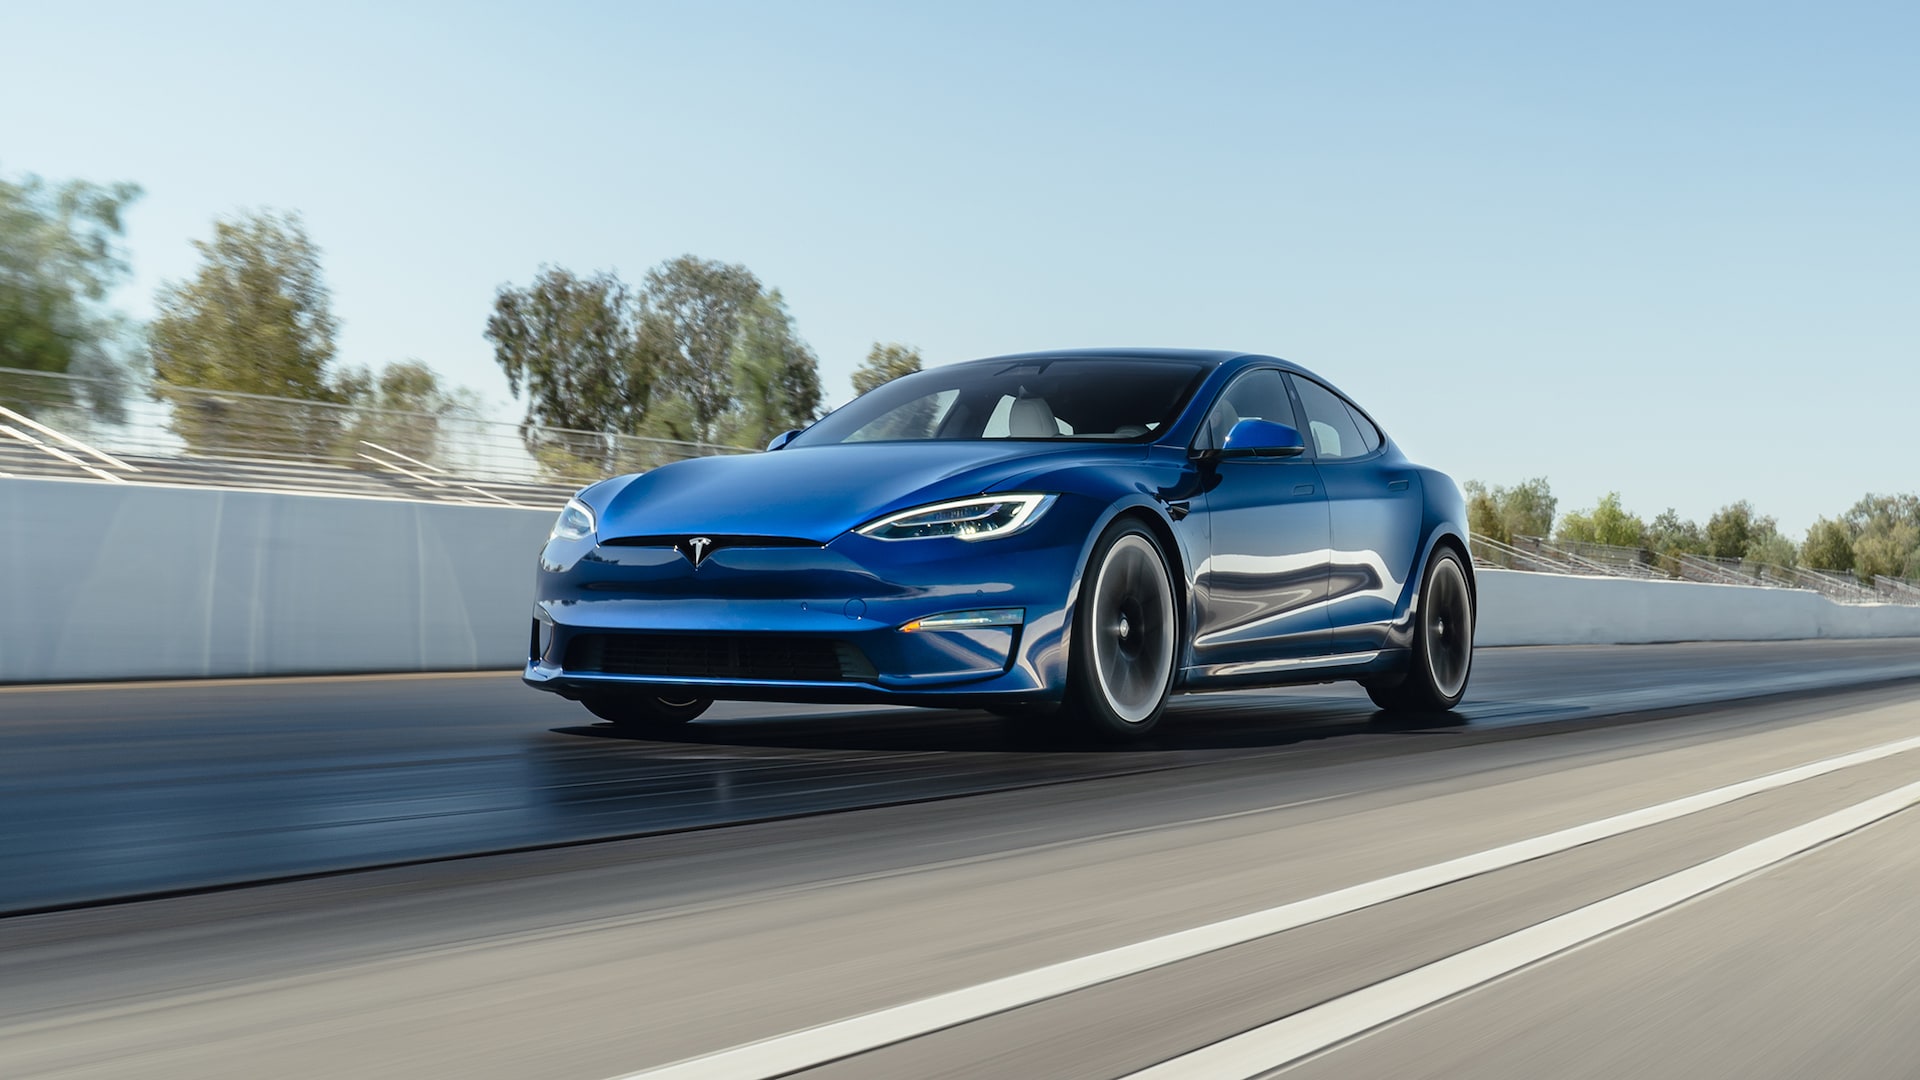 2022 Tesla Model S Prices, Reviews, and Photos - MotorTrend